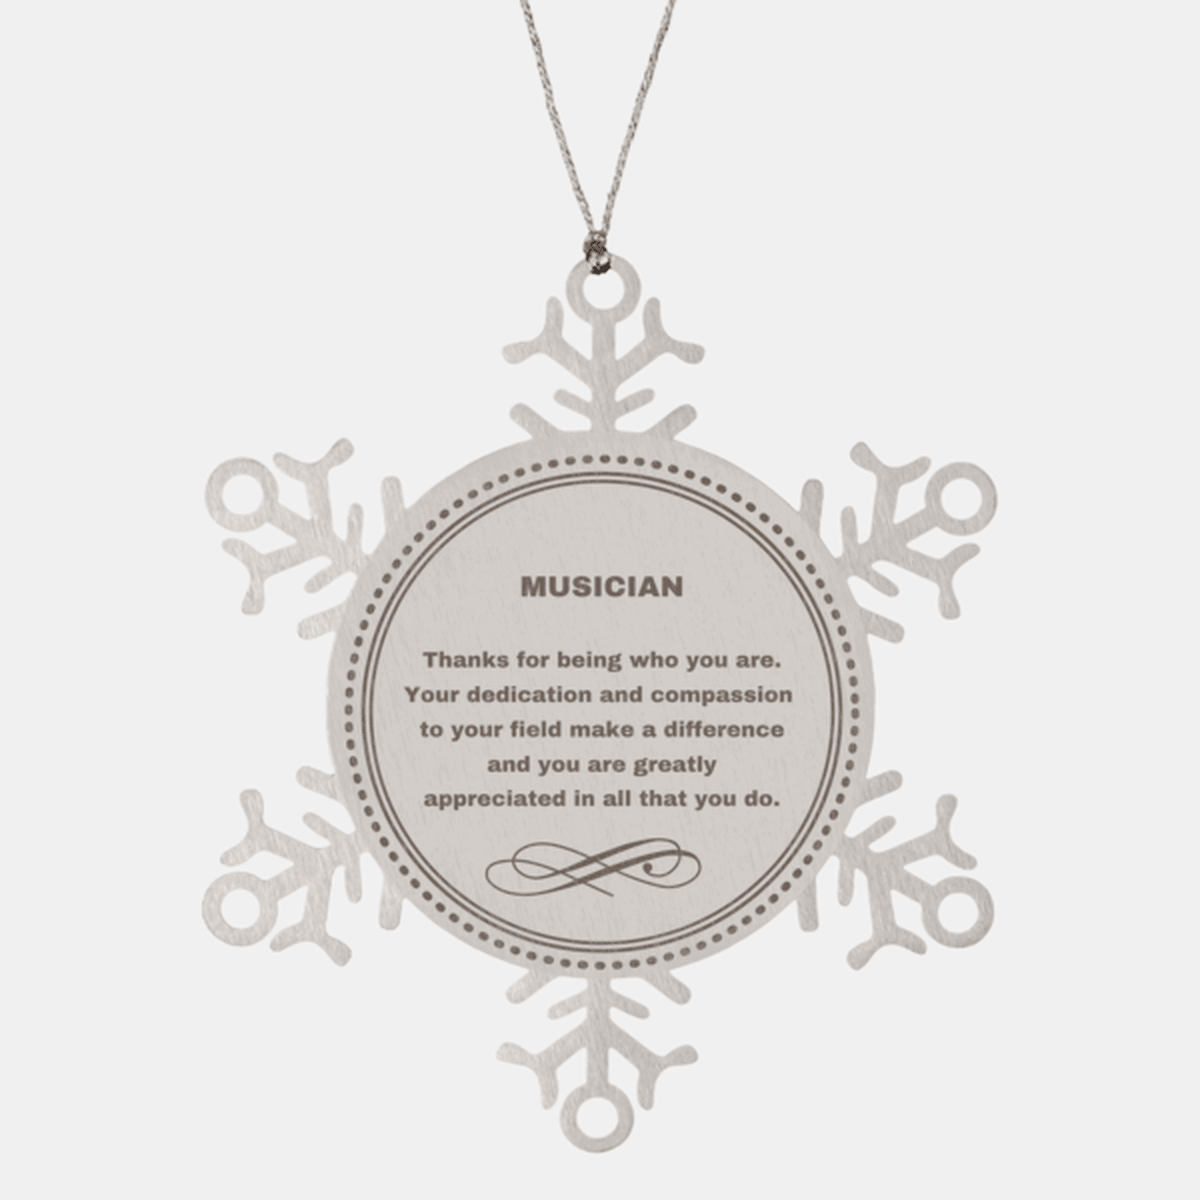 Musician Snowflake Ornament - Thanks for being who you are - Birthday Christmas Jewelry Gifts Coworkers Colleague Boss - Mallard Moon Gift Shop